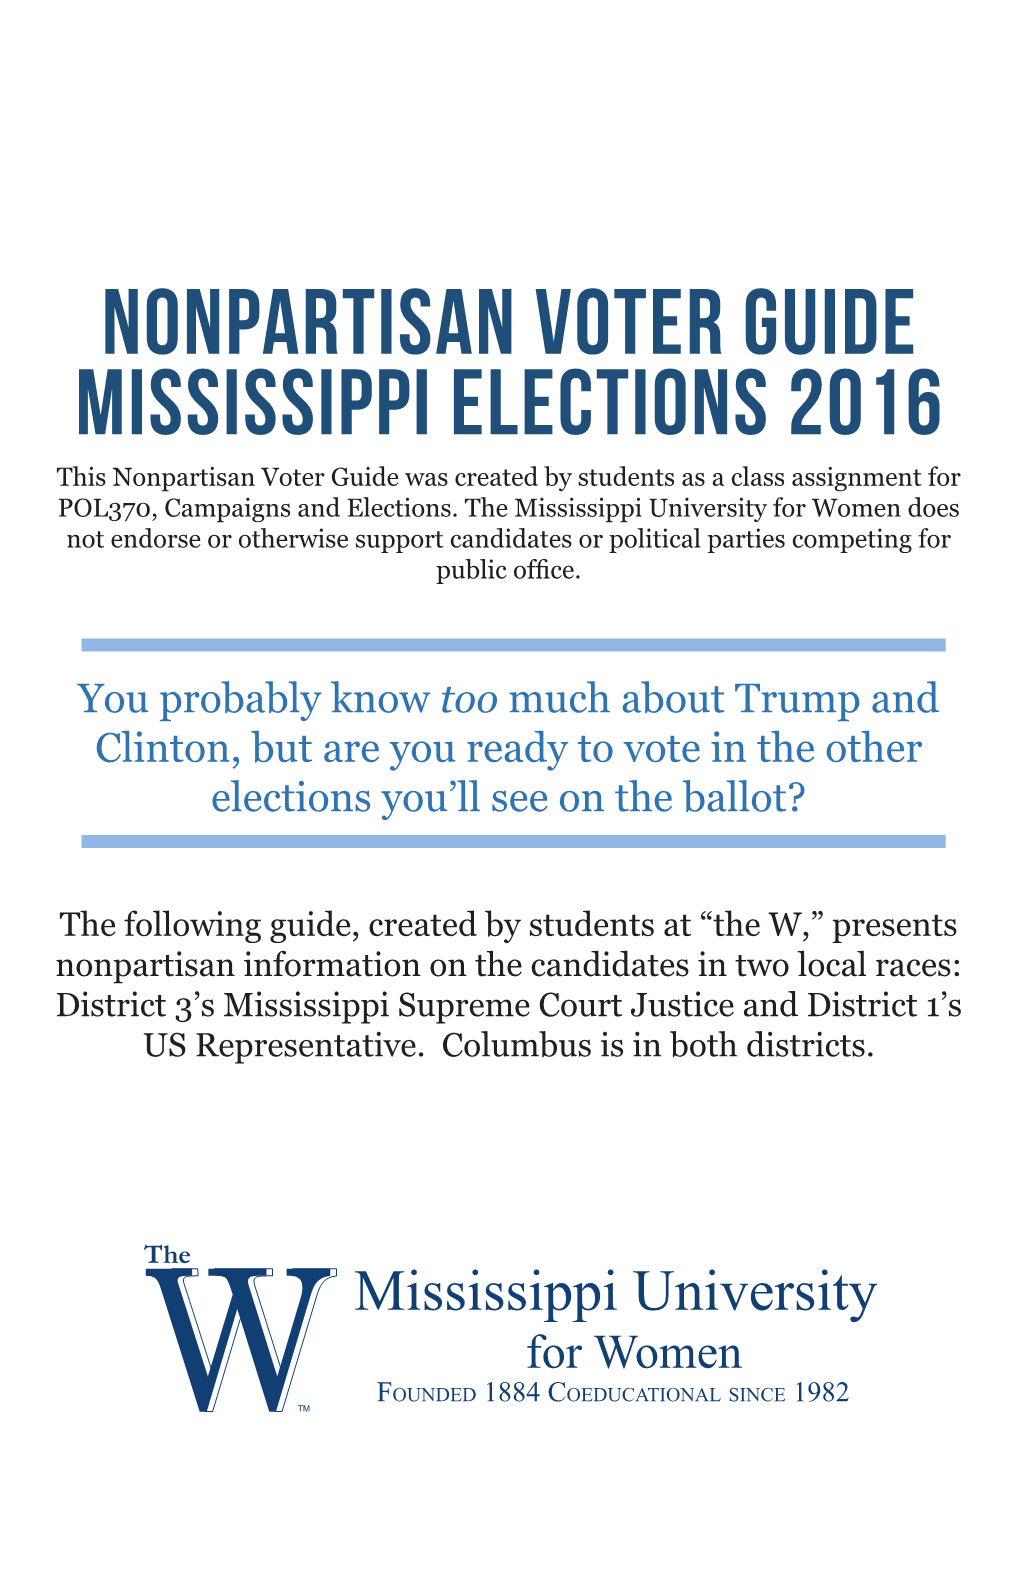 Nonpartisan Voter Guide Mississippi Elections 2016 This Nonpartisan Voter Guide Was Created by Students As a Class Assignment for POL370, Campaigns and Elections